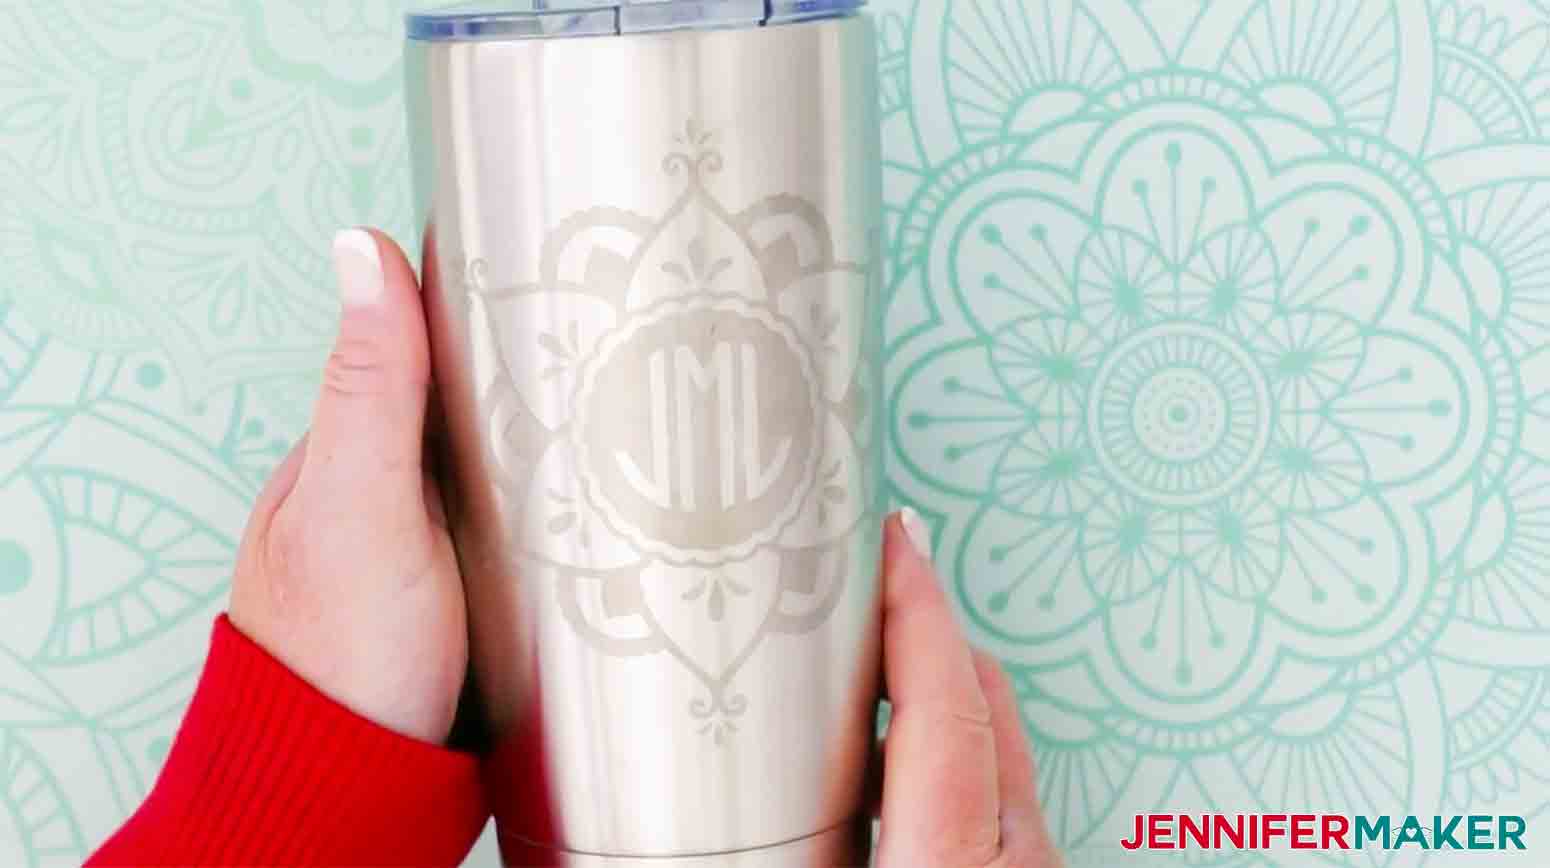 etched stainless steel tumbler with monogram design including initials JML inside a mandala